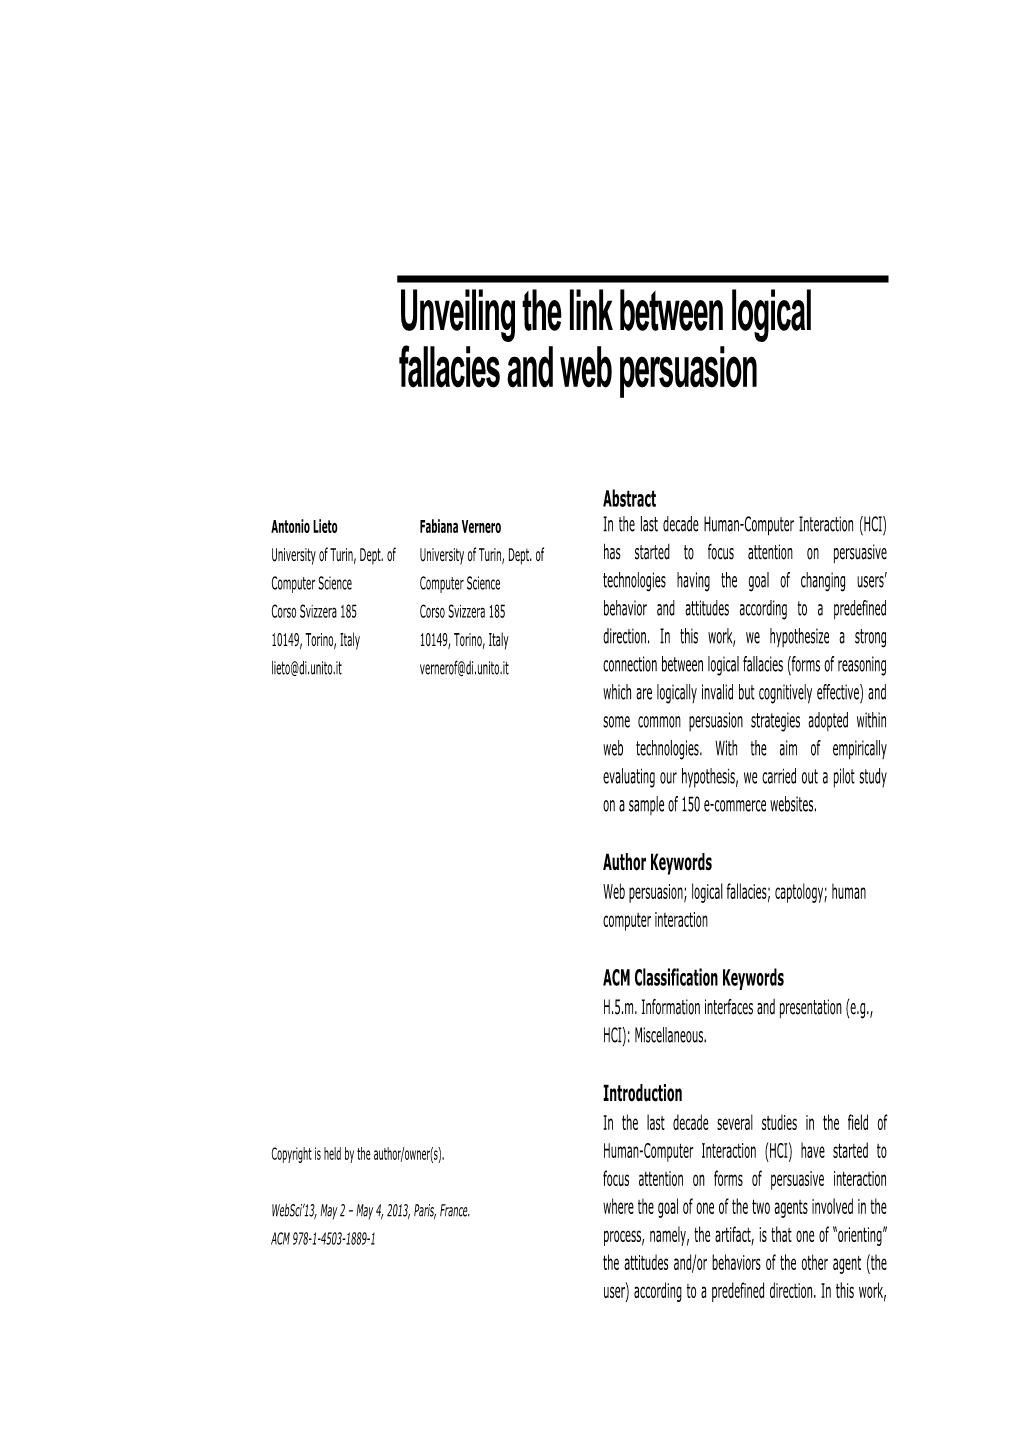 Unveiling the Link Between Logical Fallacies and Web Persuasion